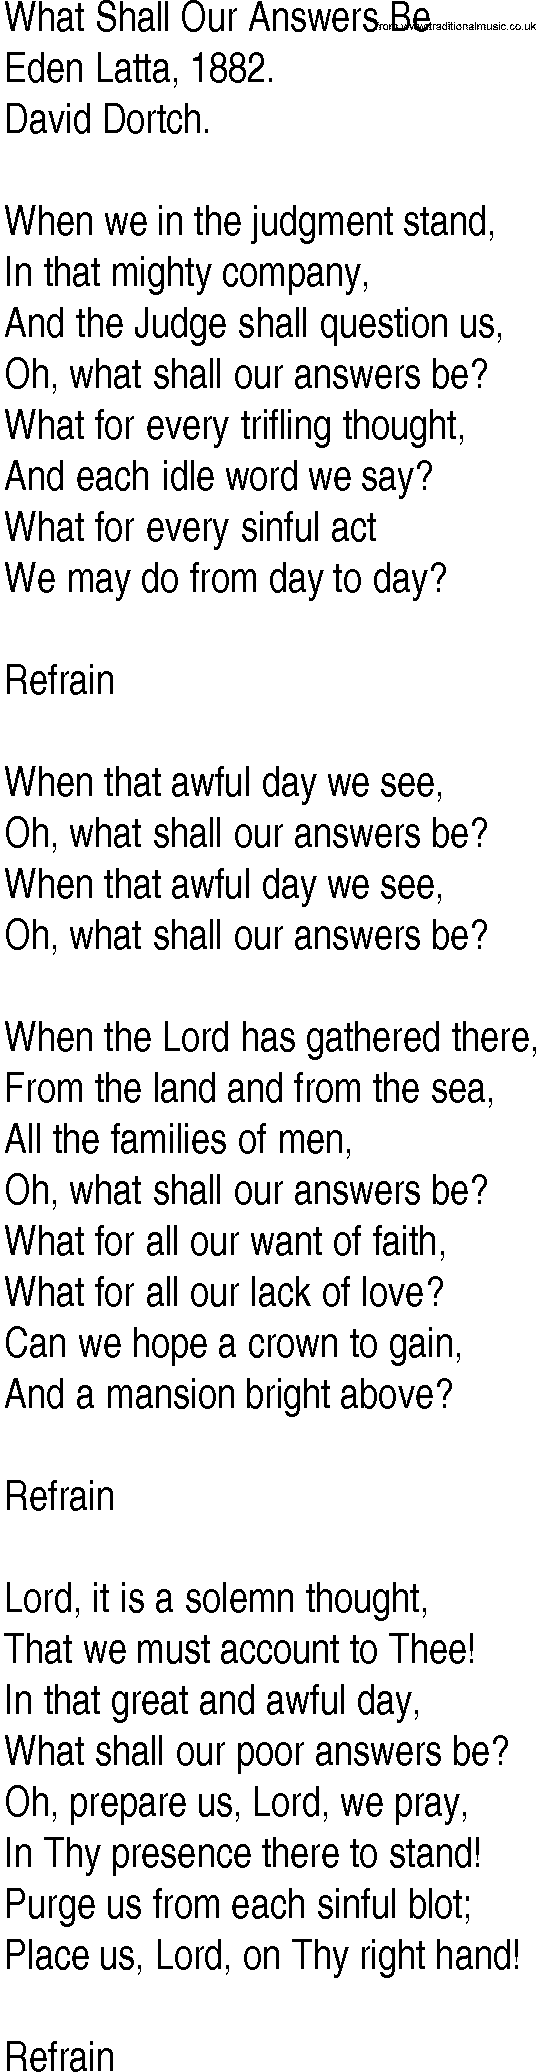 Hymn and Gospel Song: What Shall Our Answers Be by Eden Latta lyrics